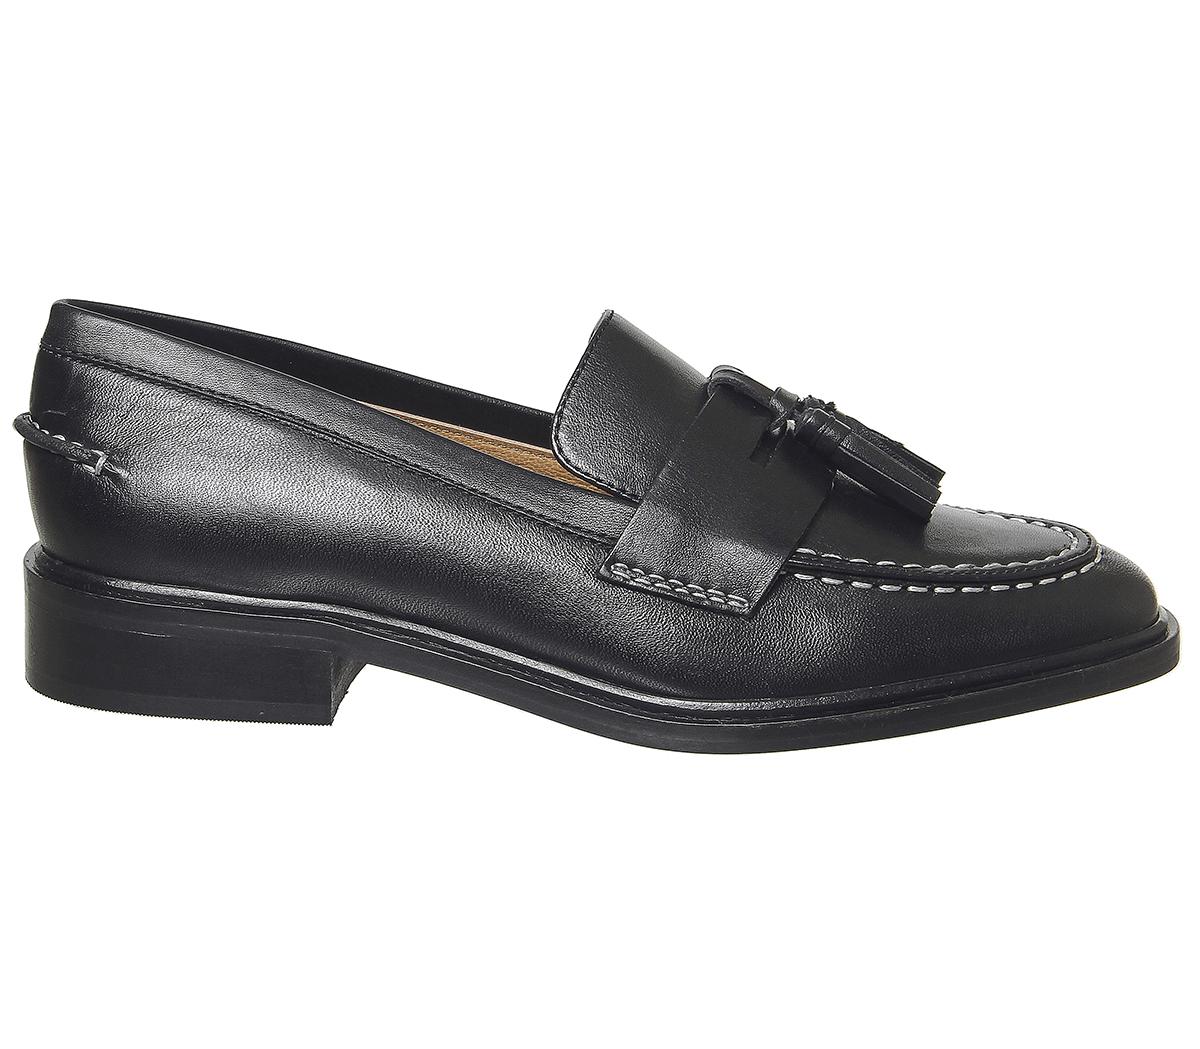 Office Falling Loafers Black Leather - Flat Shoes for Women